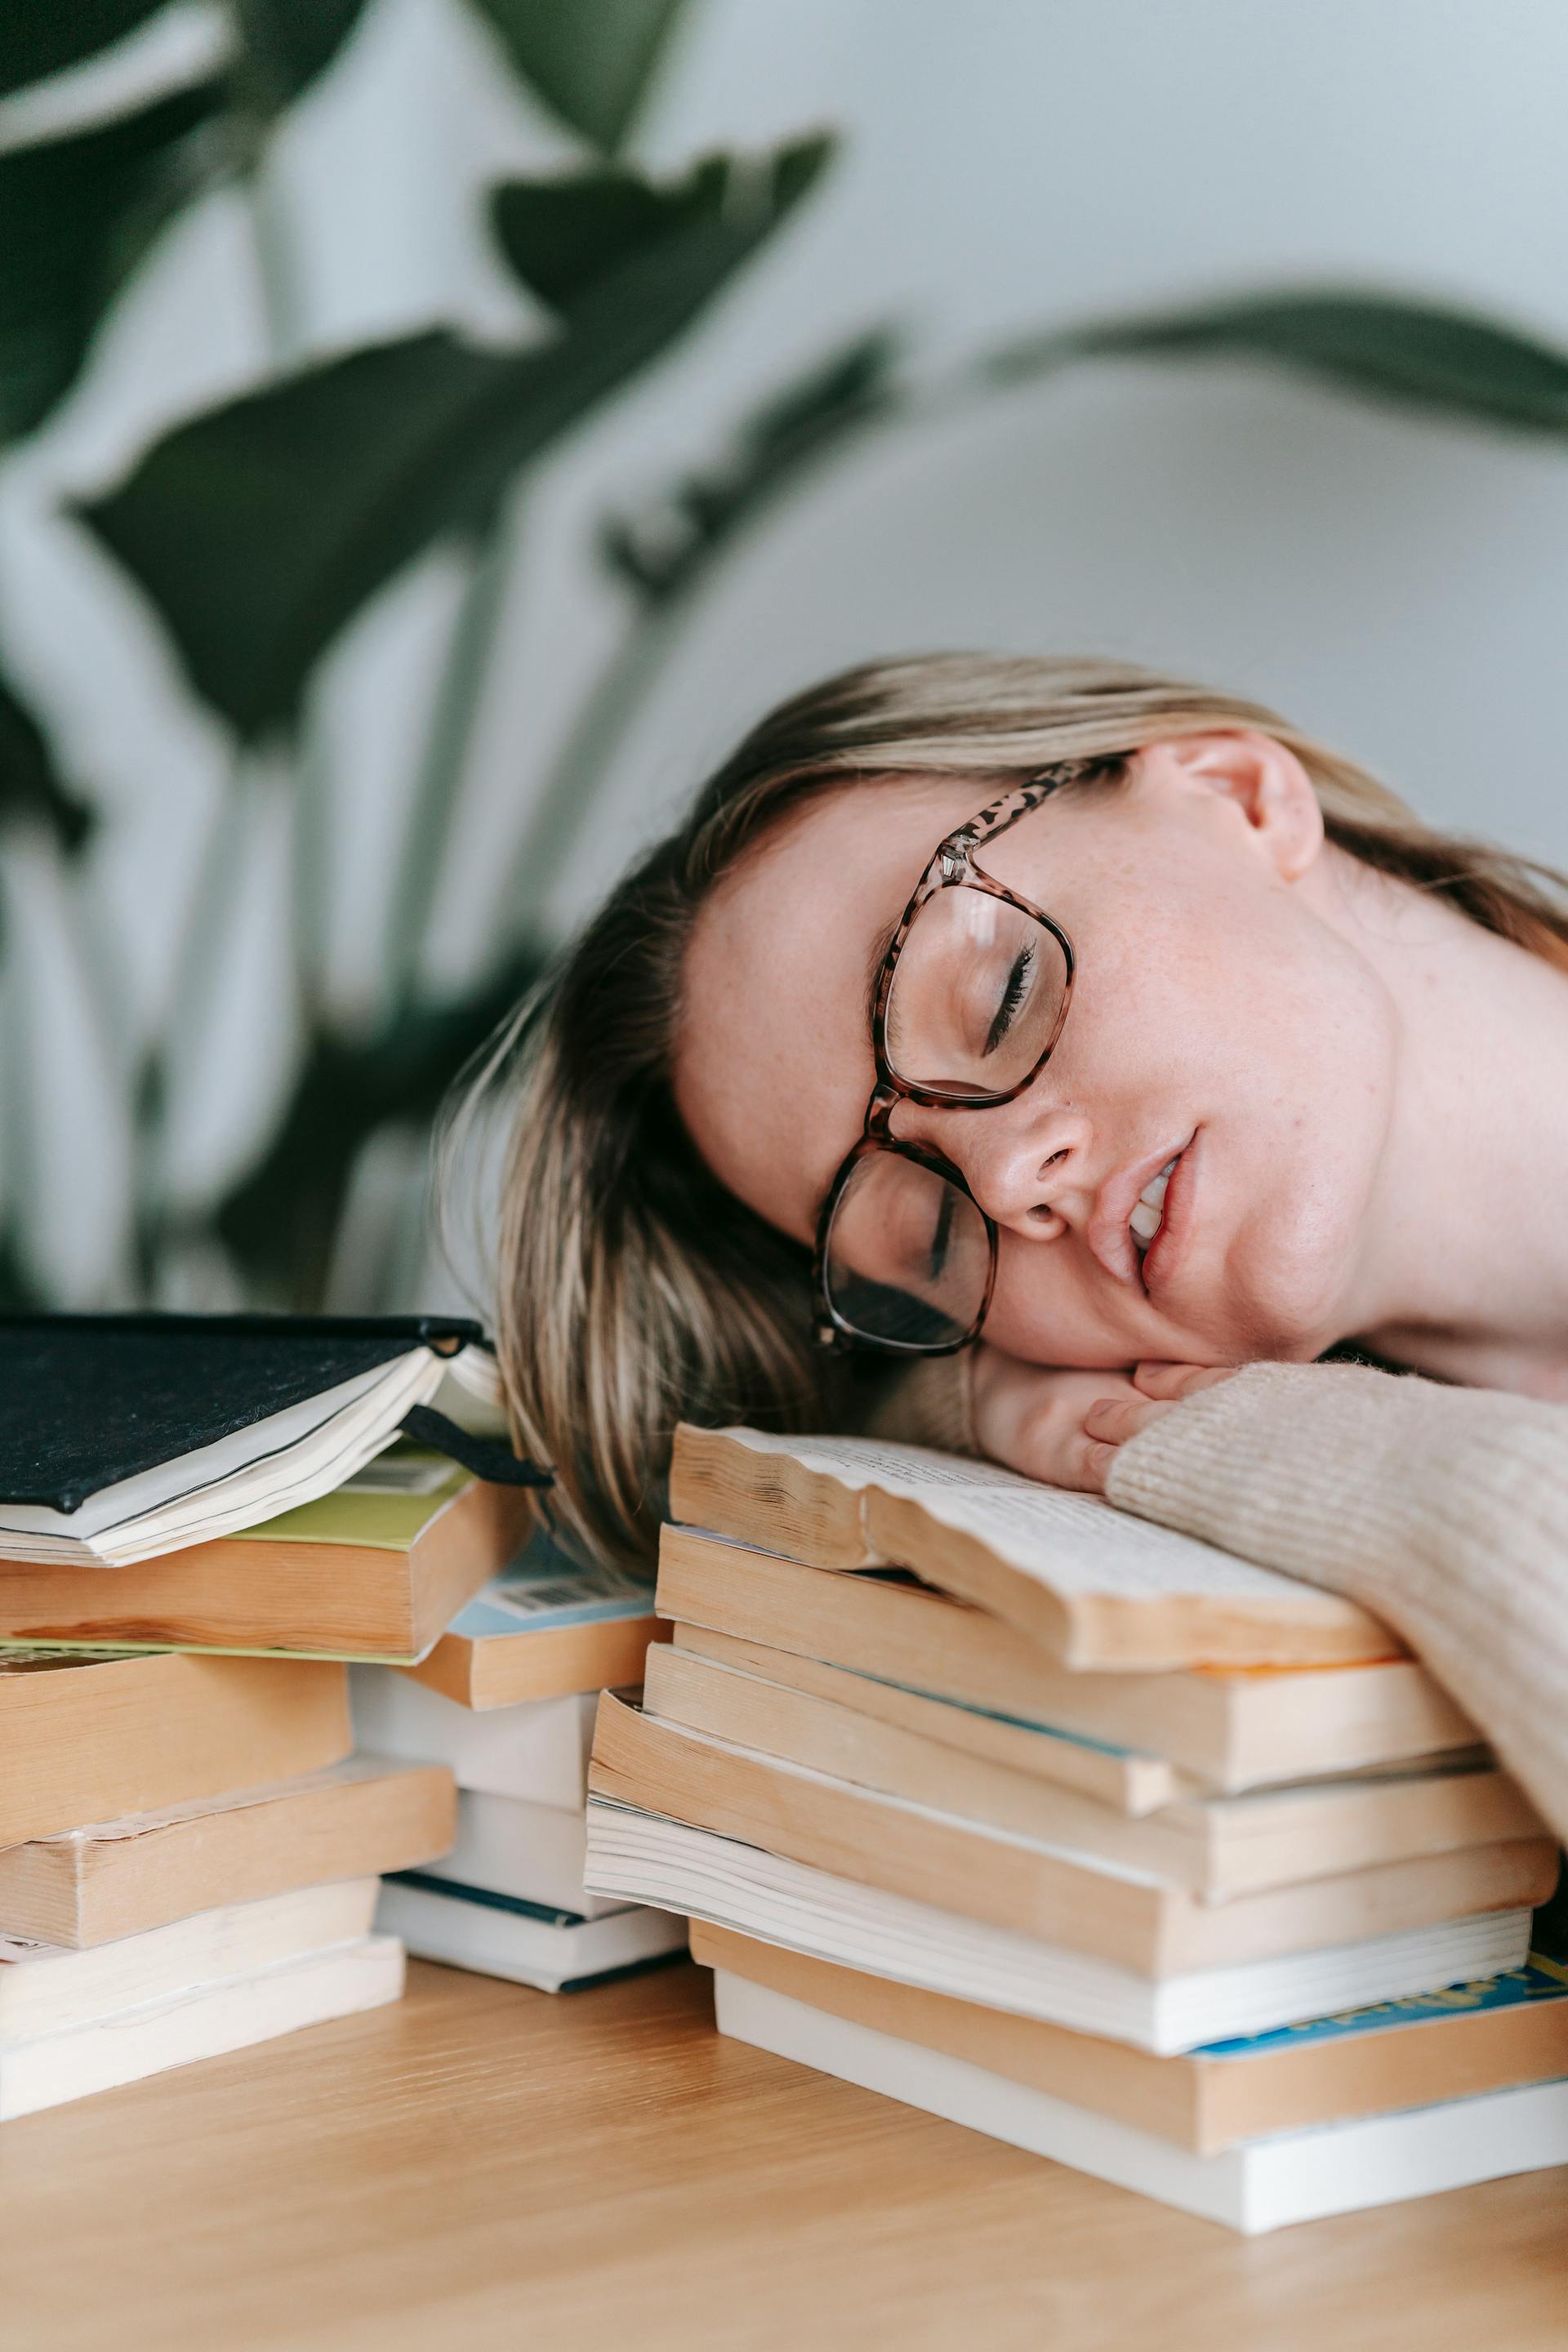 A tired young woman resting her head on a pile of books | Source: Pexels